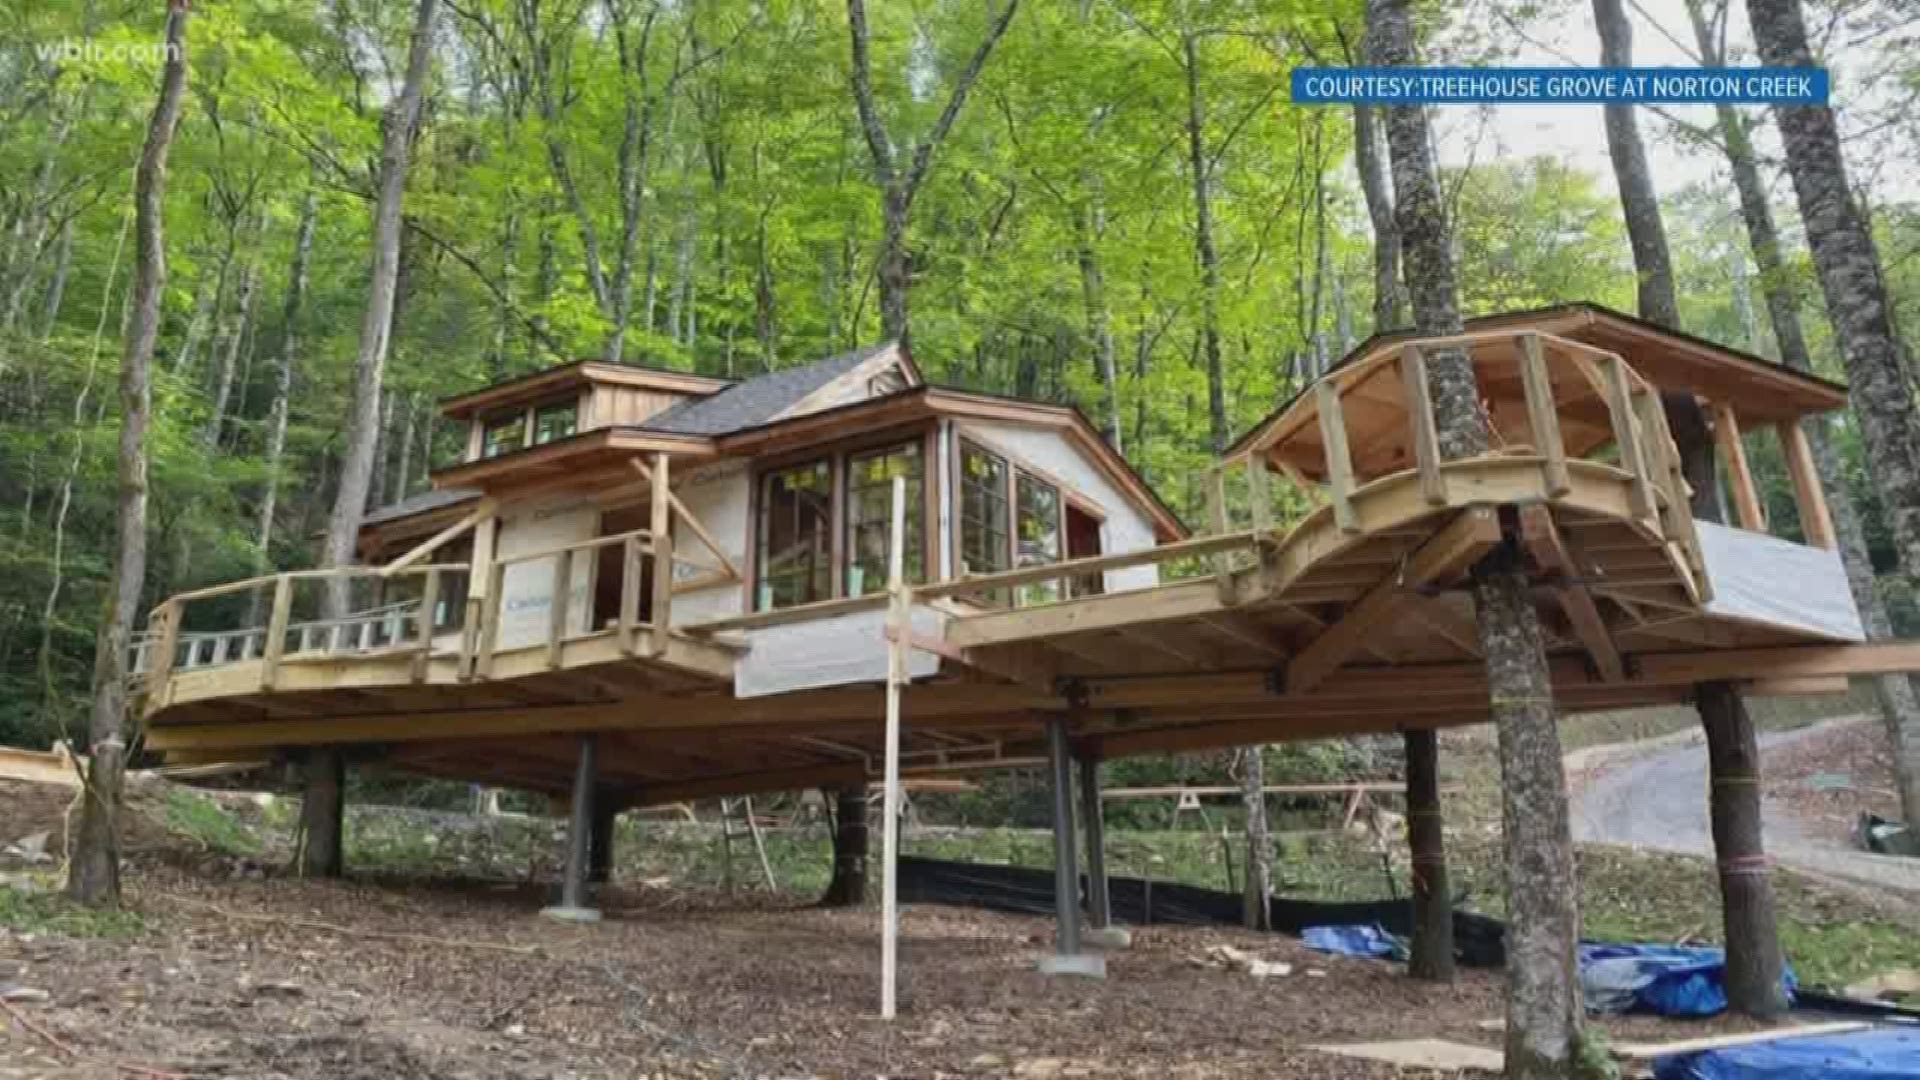 Eight treehouse getaways are coming to the Smokies next year.